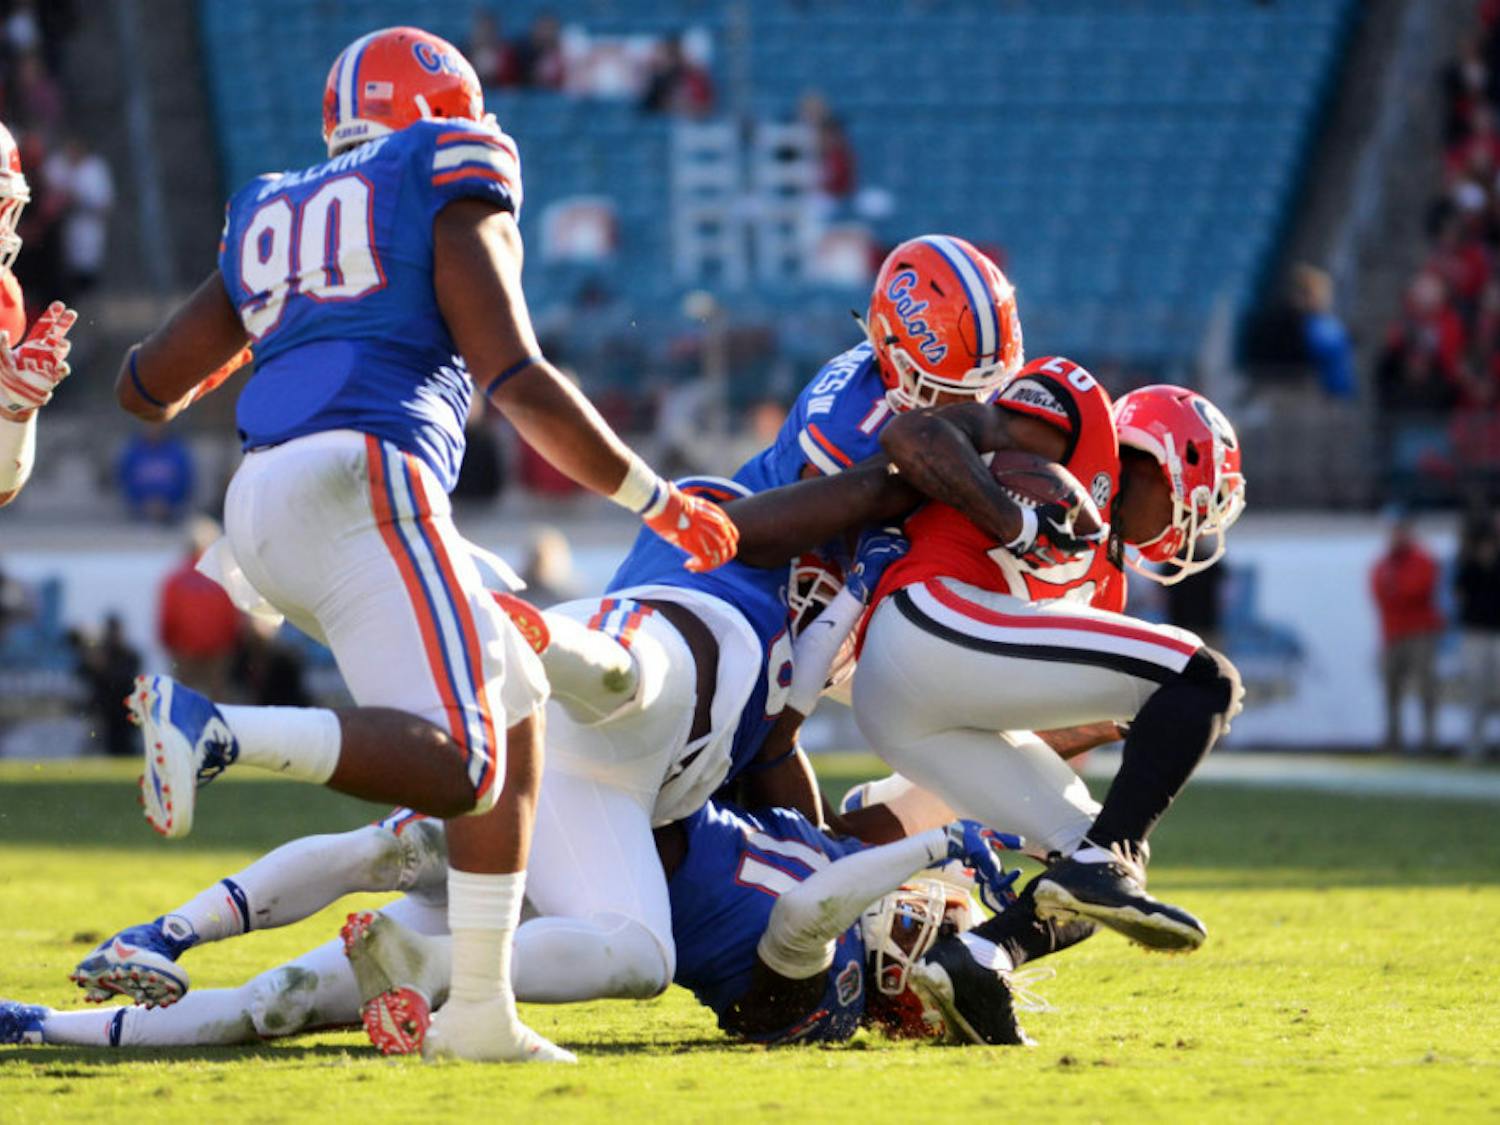 Vernon Hargreaves III makes a tackle during Florida's 38-20 win against Georgia at EverBank Field in Jacksonville.